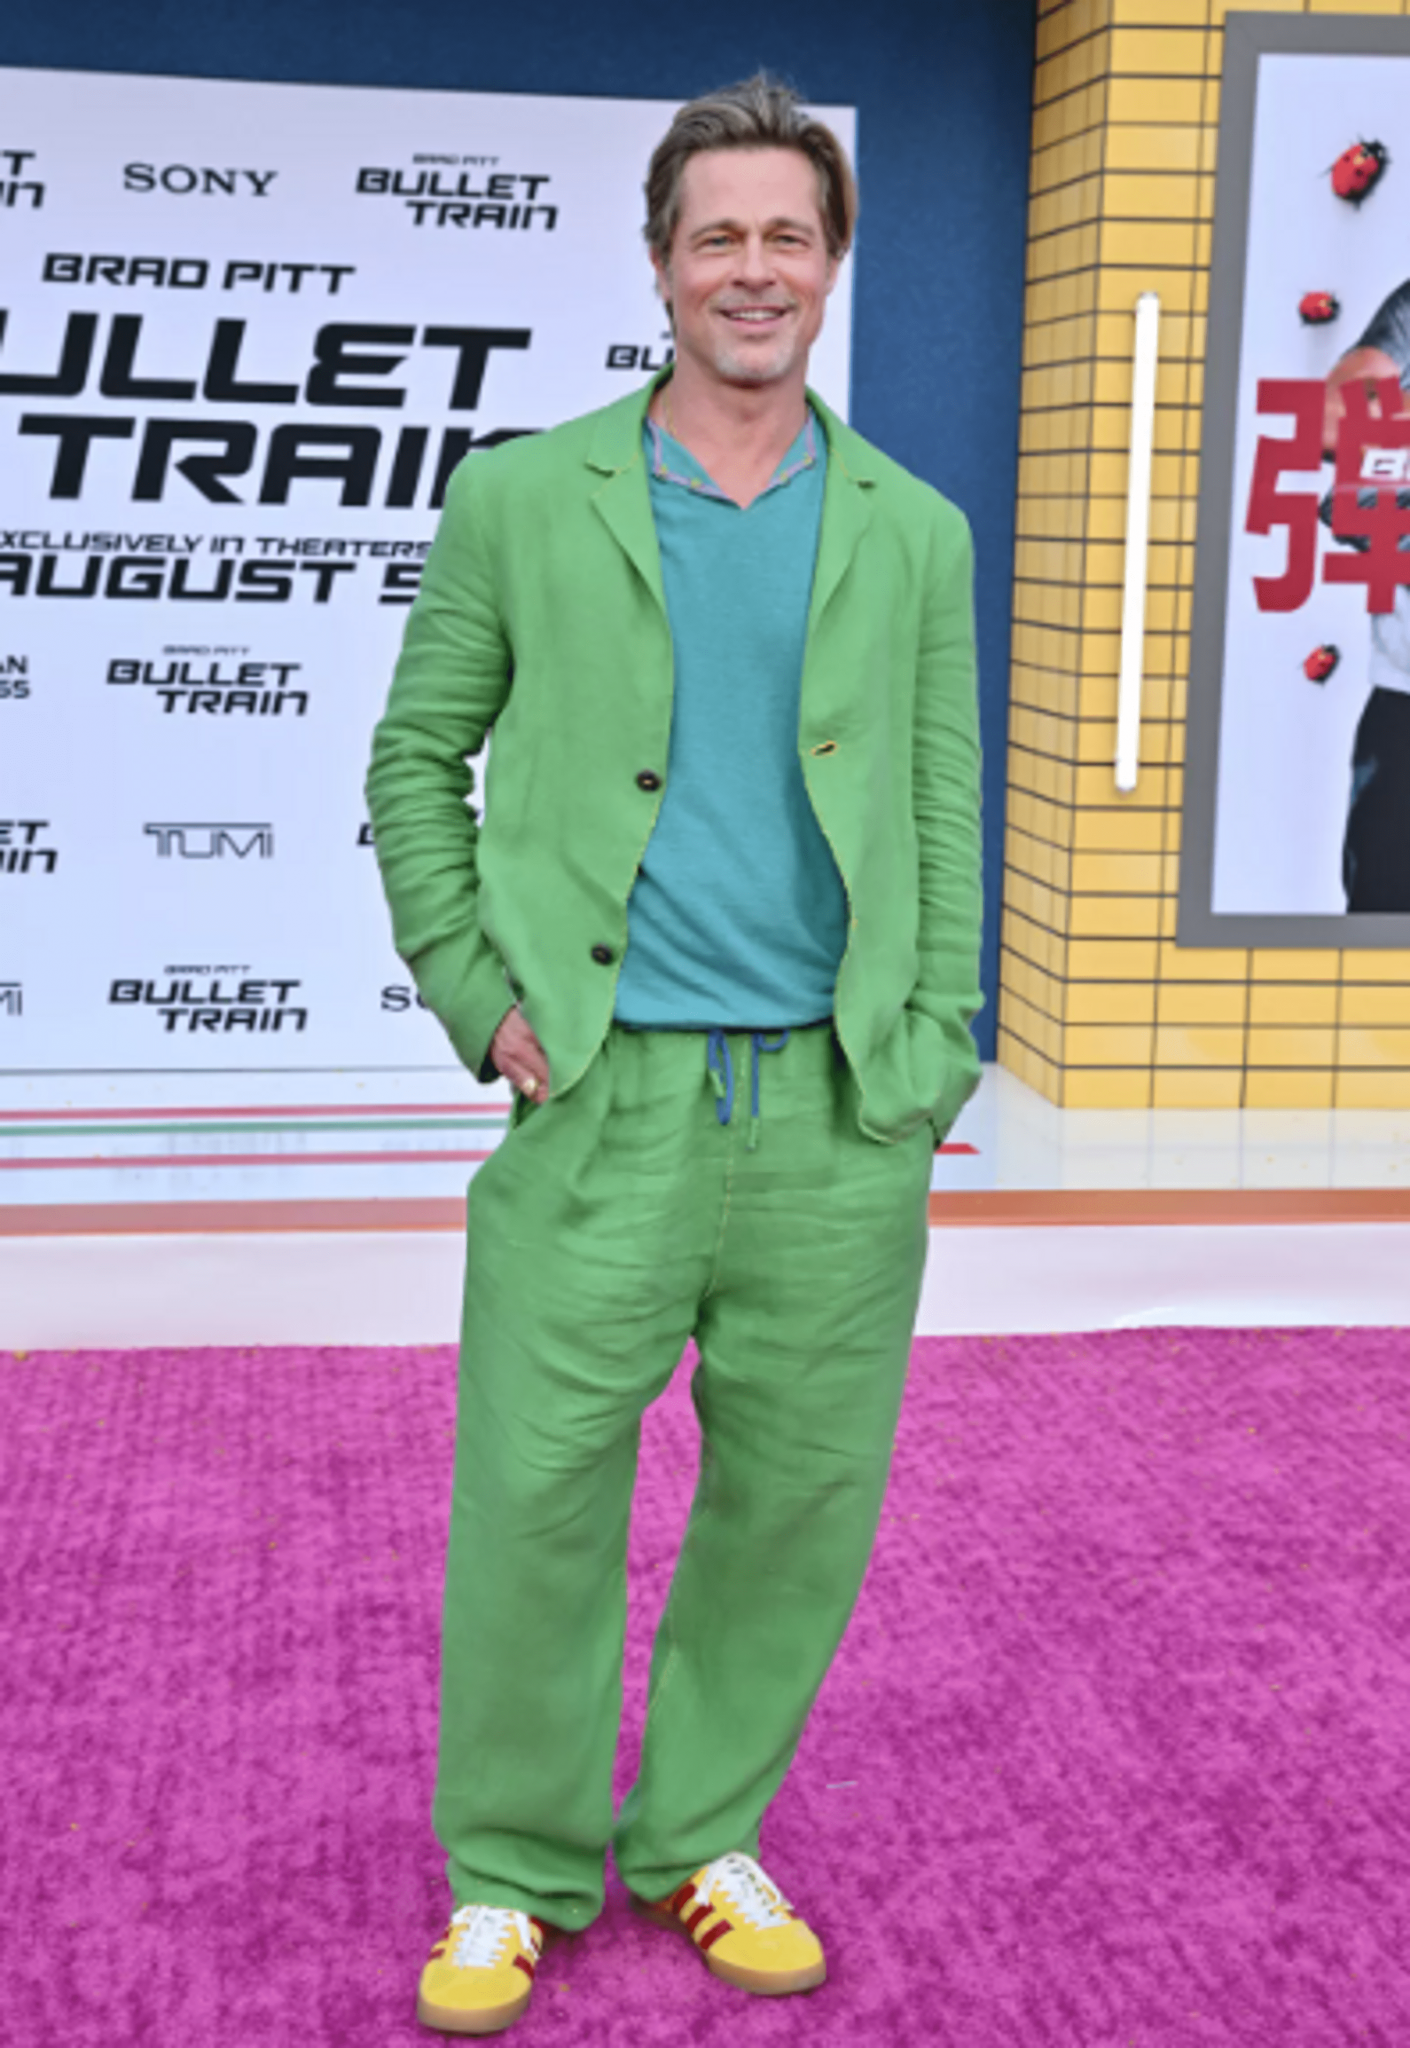 Brad Pitt wearing a green chic outfit at the premiere of "Bullet Train"